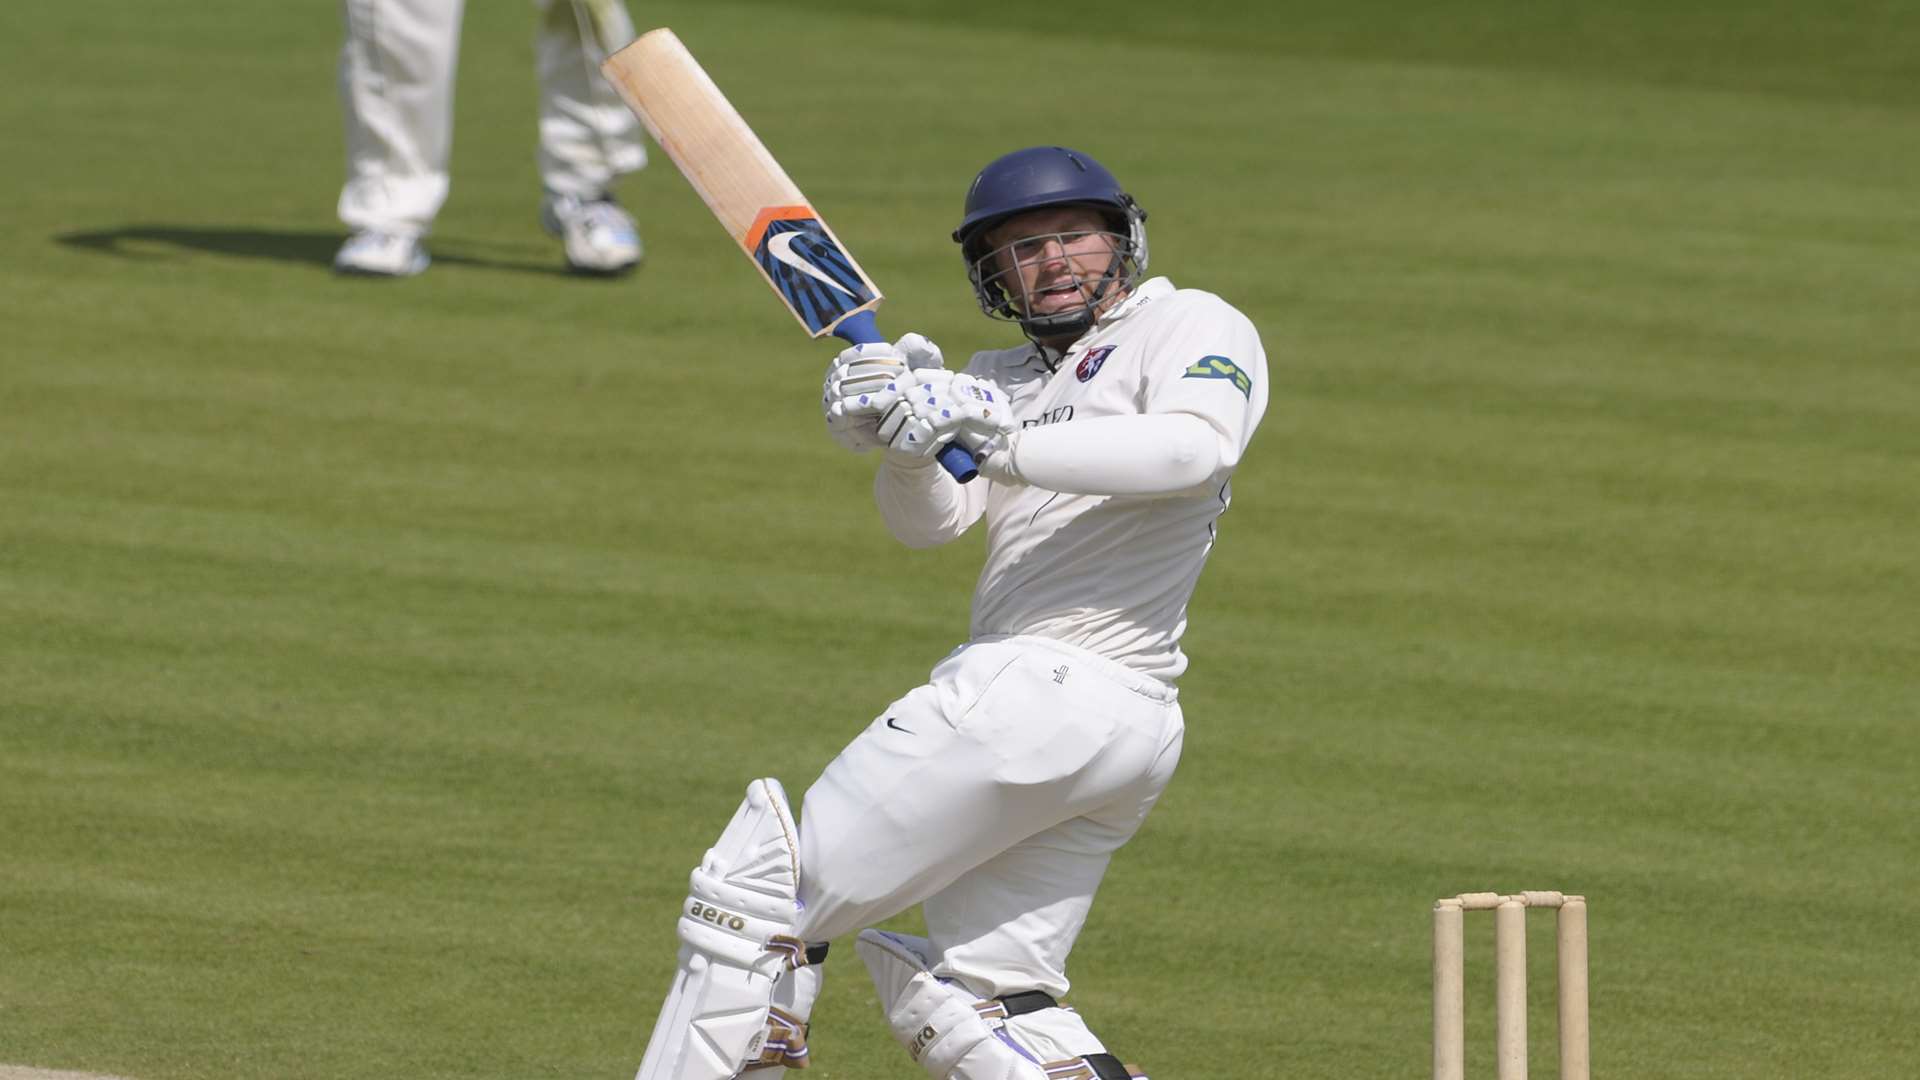 Adam Ball in action against Surrey. Picture: Barry Goodwin